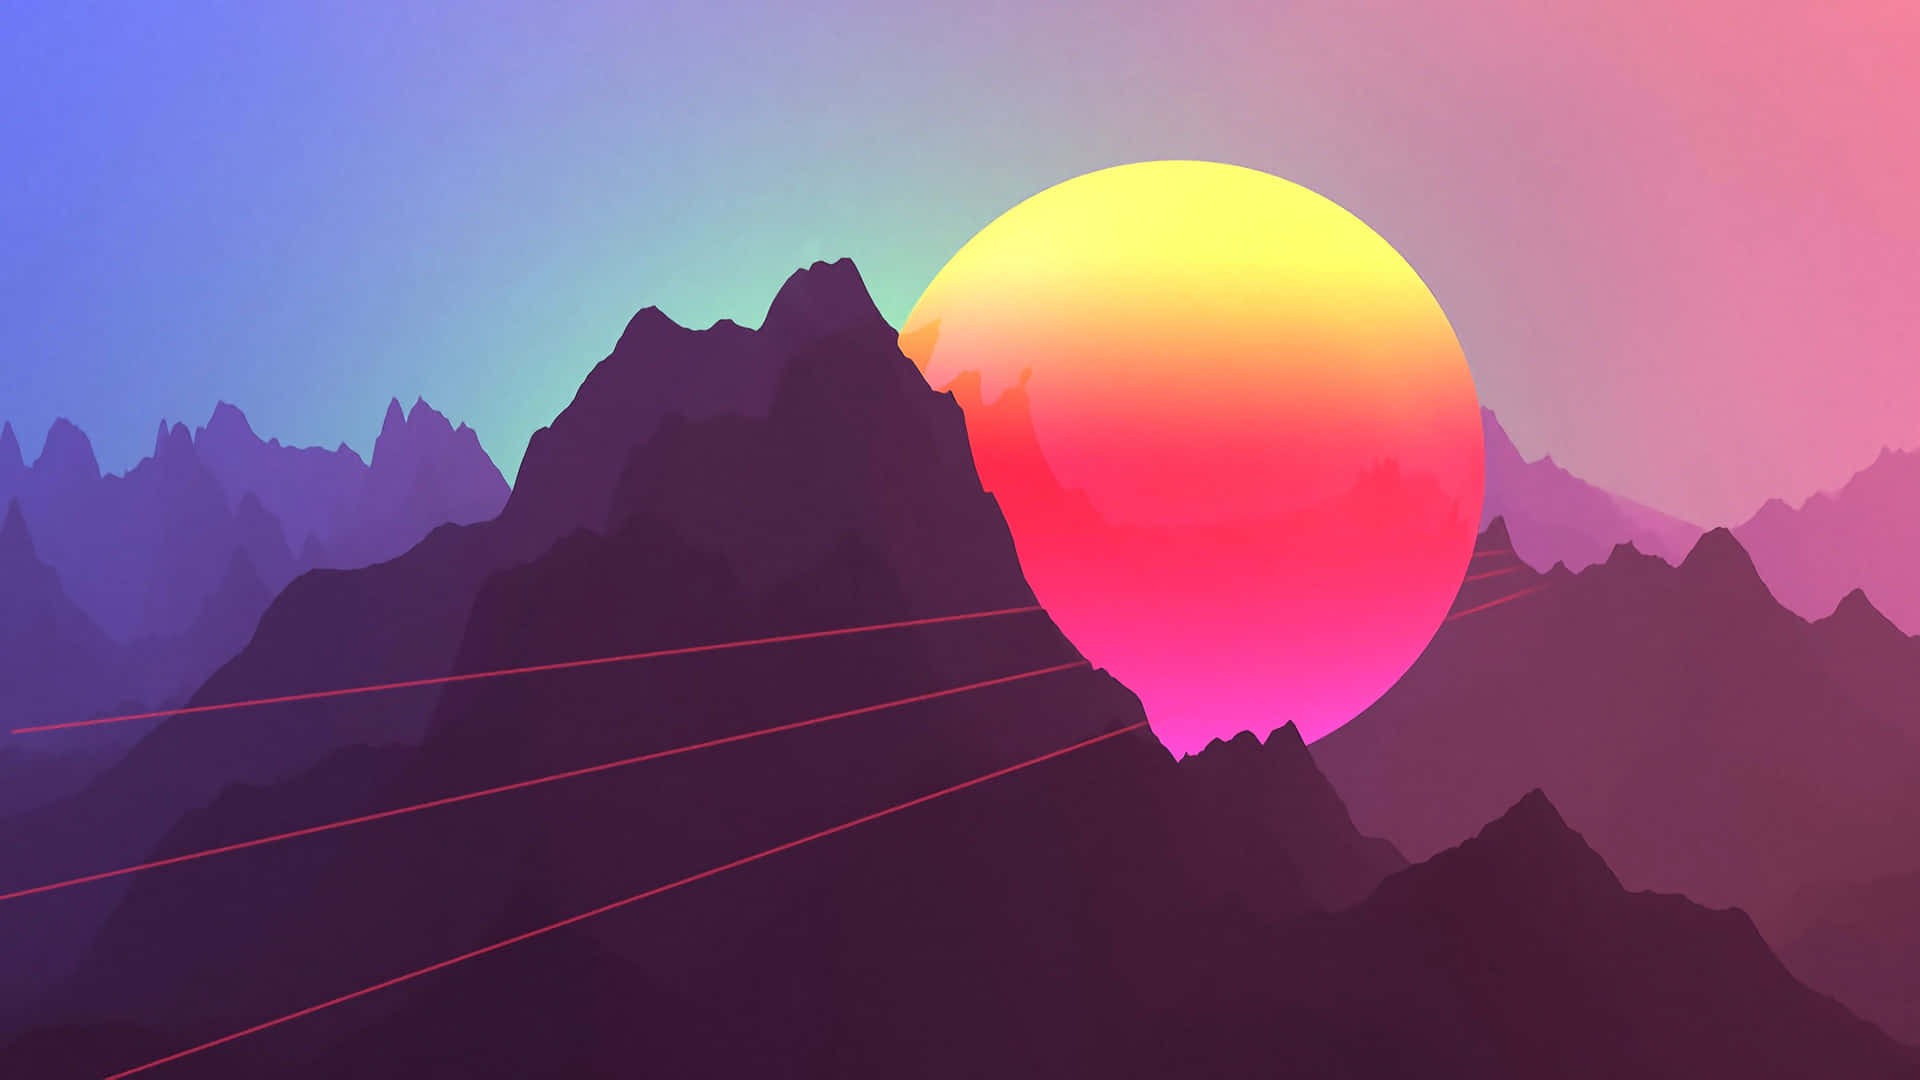 Take a Look at this Vibrant Retro Sunset Wallpaper